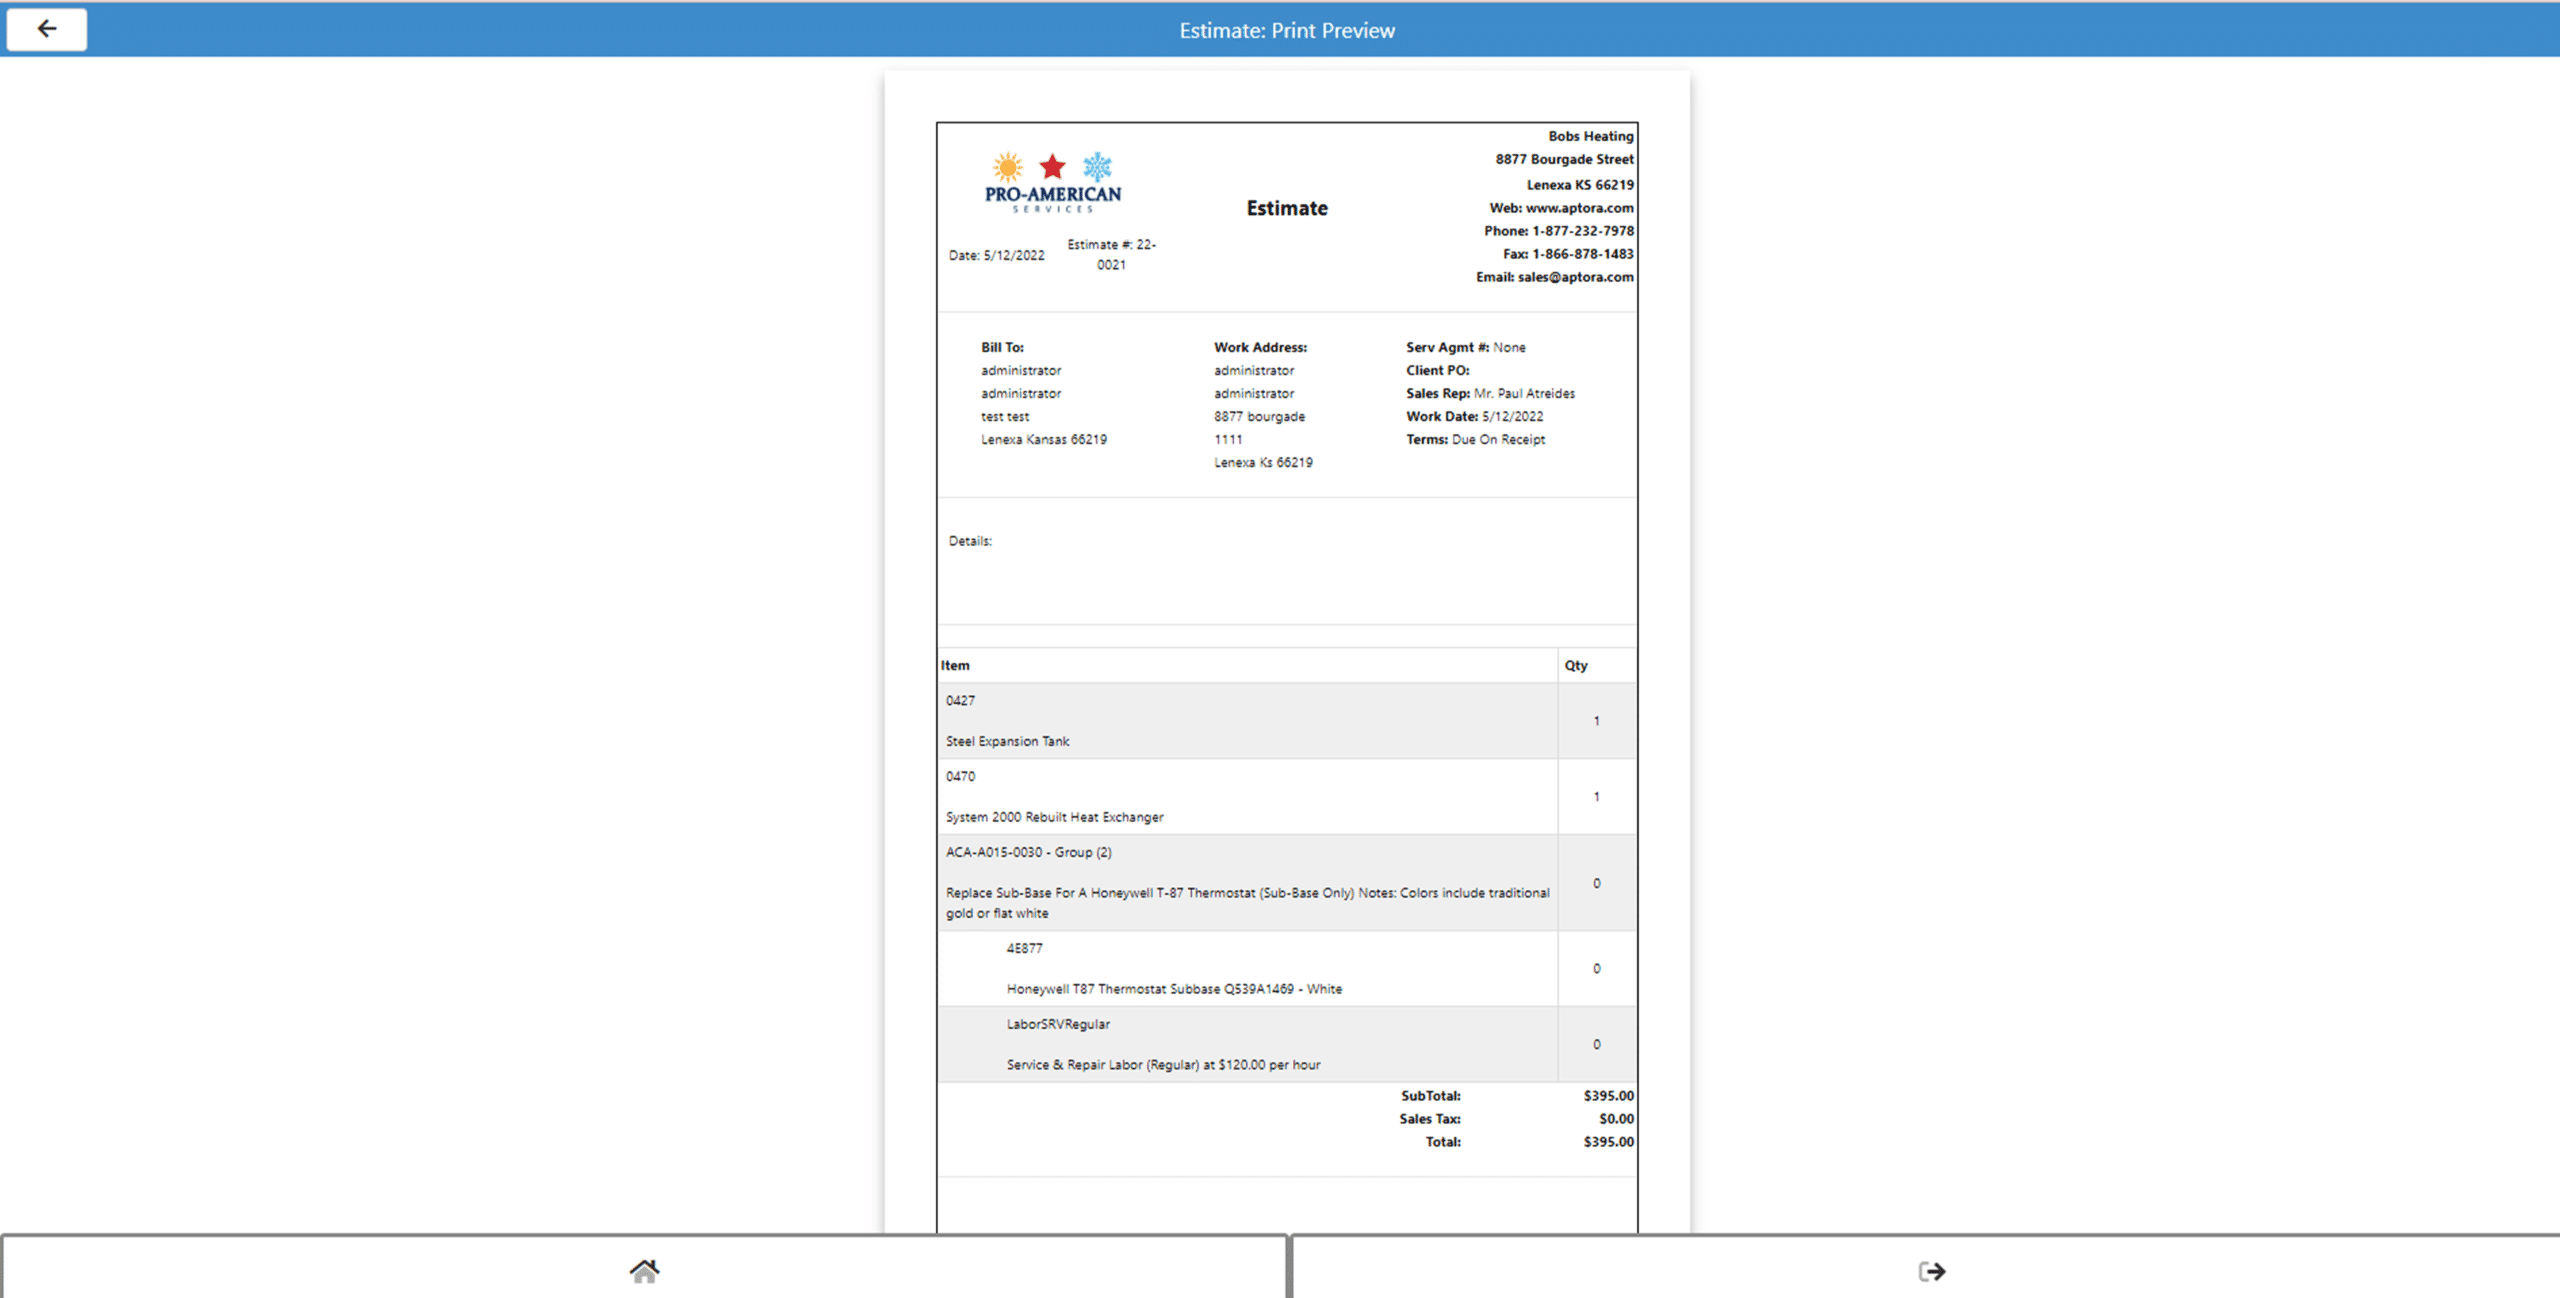 Customer Access Portal: Preview of an Estimate Document